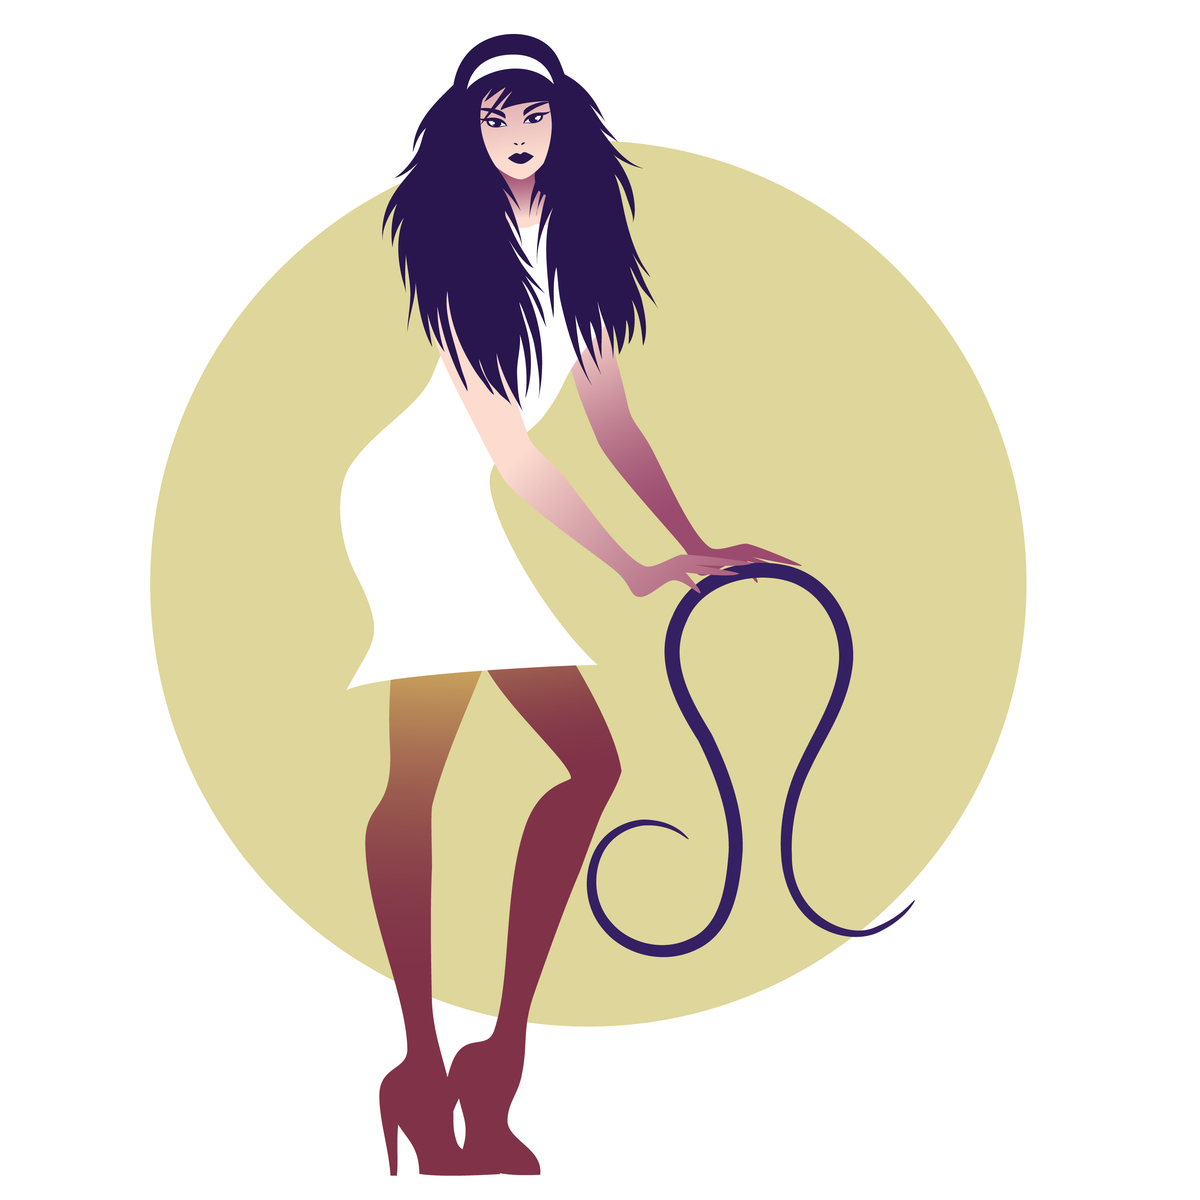 Woman with white dress and brown stockings standing with her hands on the Leo Zodiac Sign next to her.